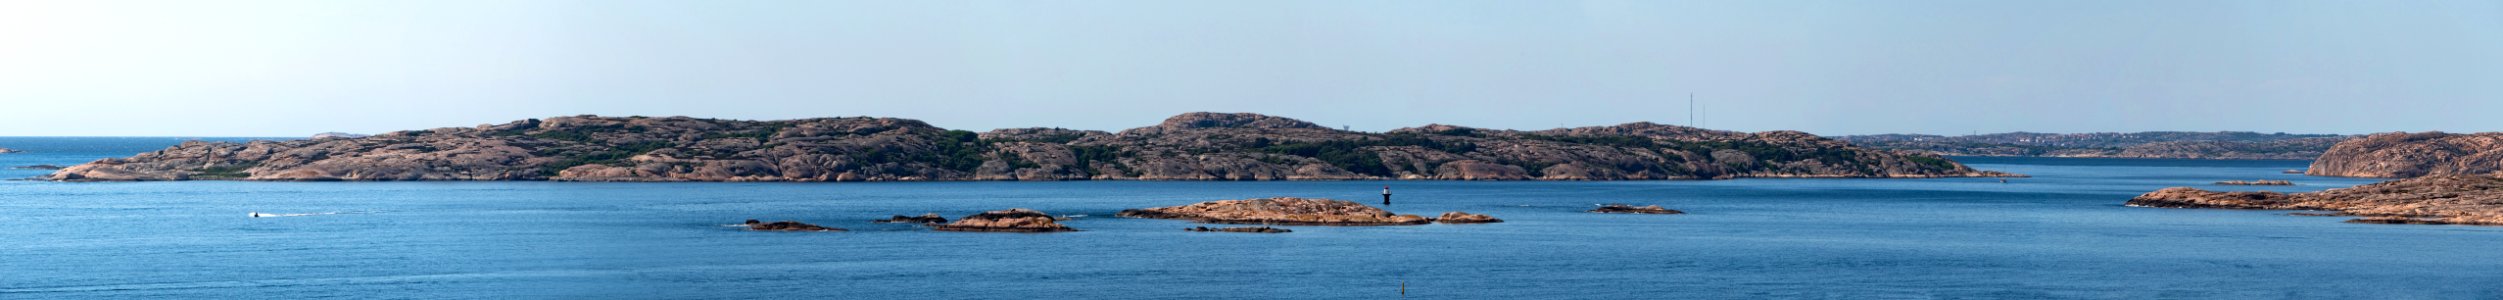 Stora Kornö as seen from North Lysekil 1 - 50 pc photo